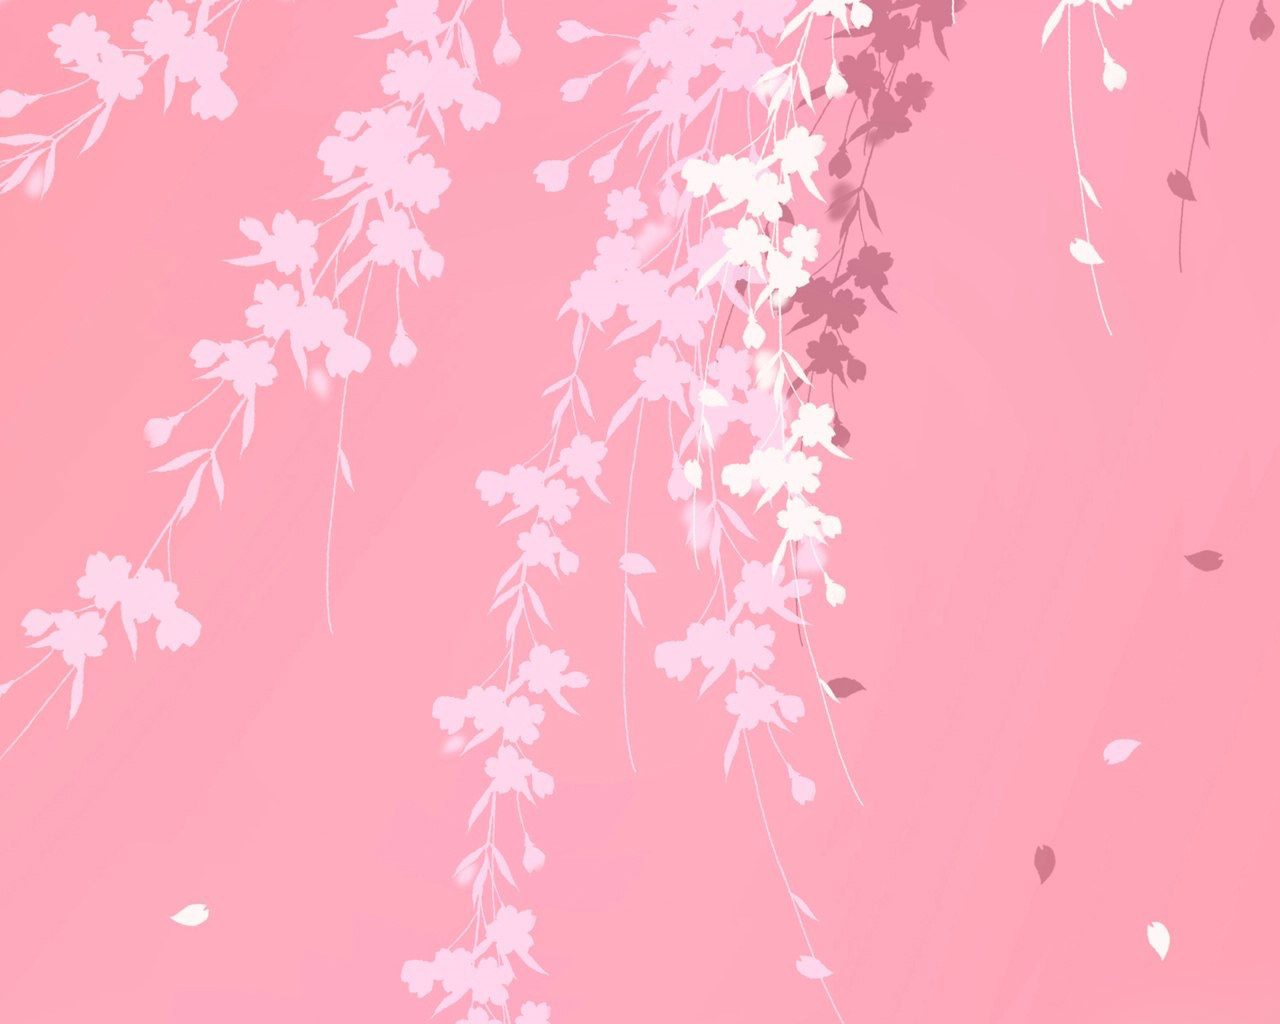 Download Pink background branches windows 7 hd Wallpaper in high 1280x1024